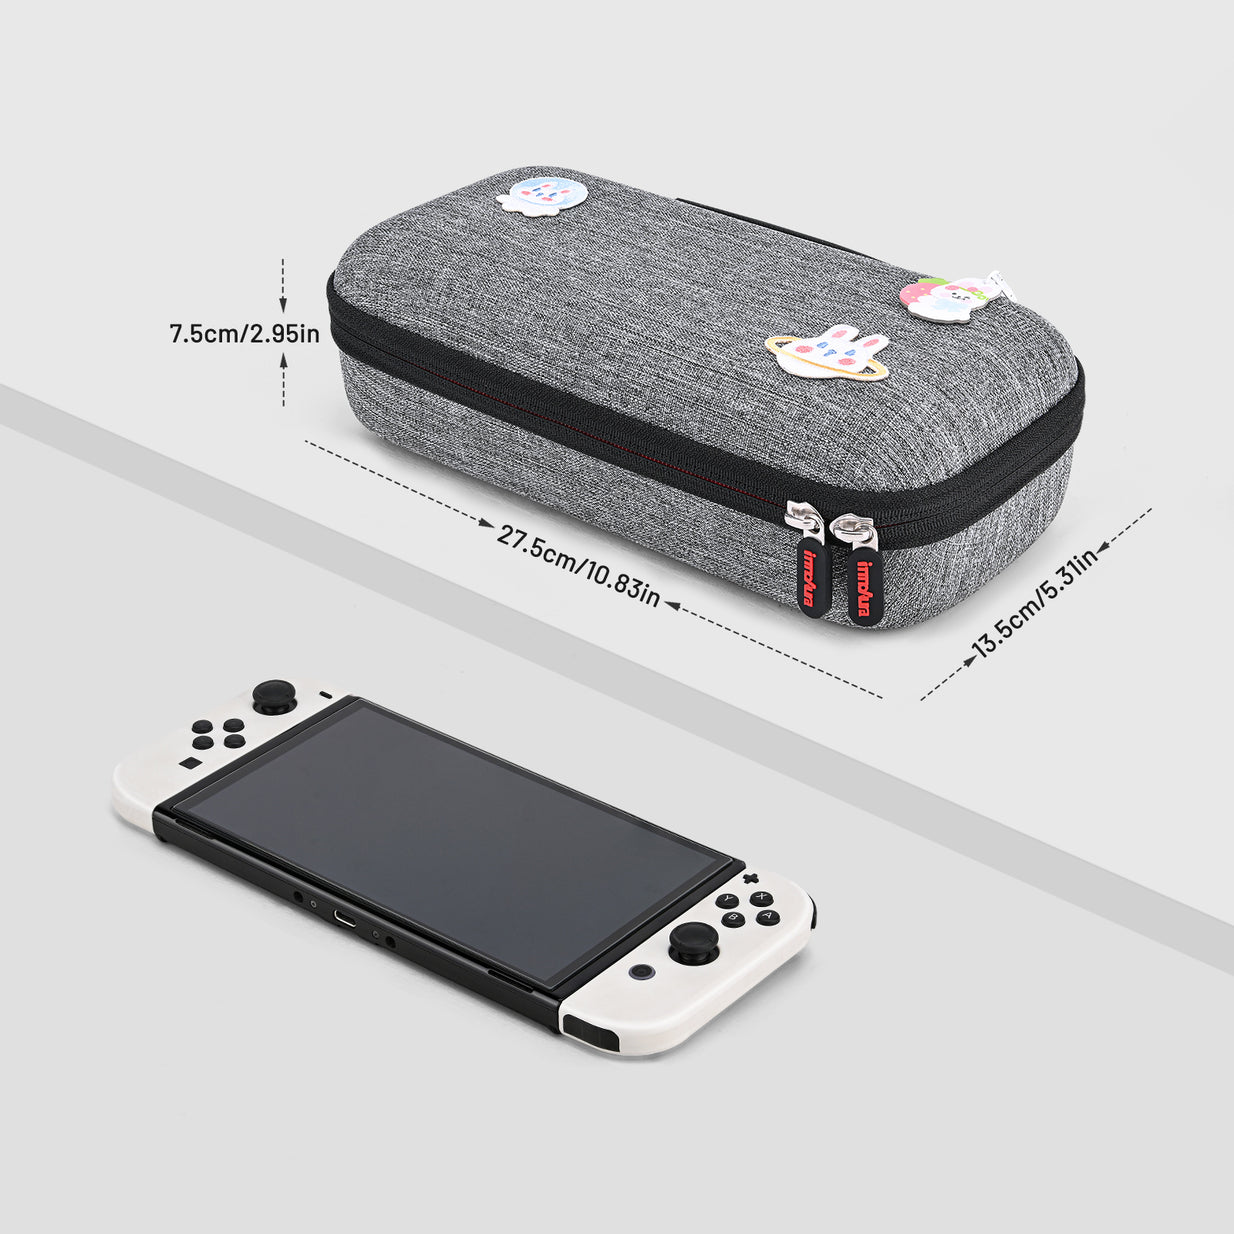 innoAura 18 Accessories OLED Hard Case Carrying Case for Nintendo Switch OLED